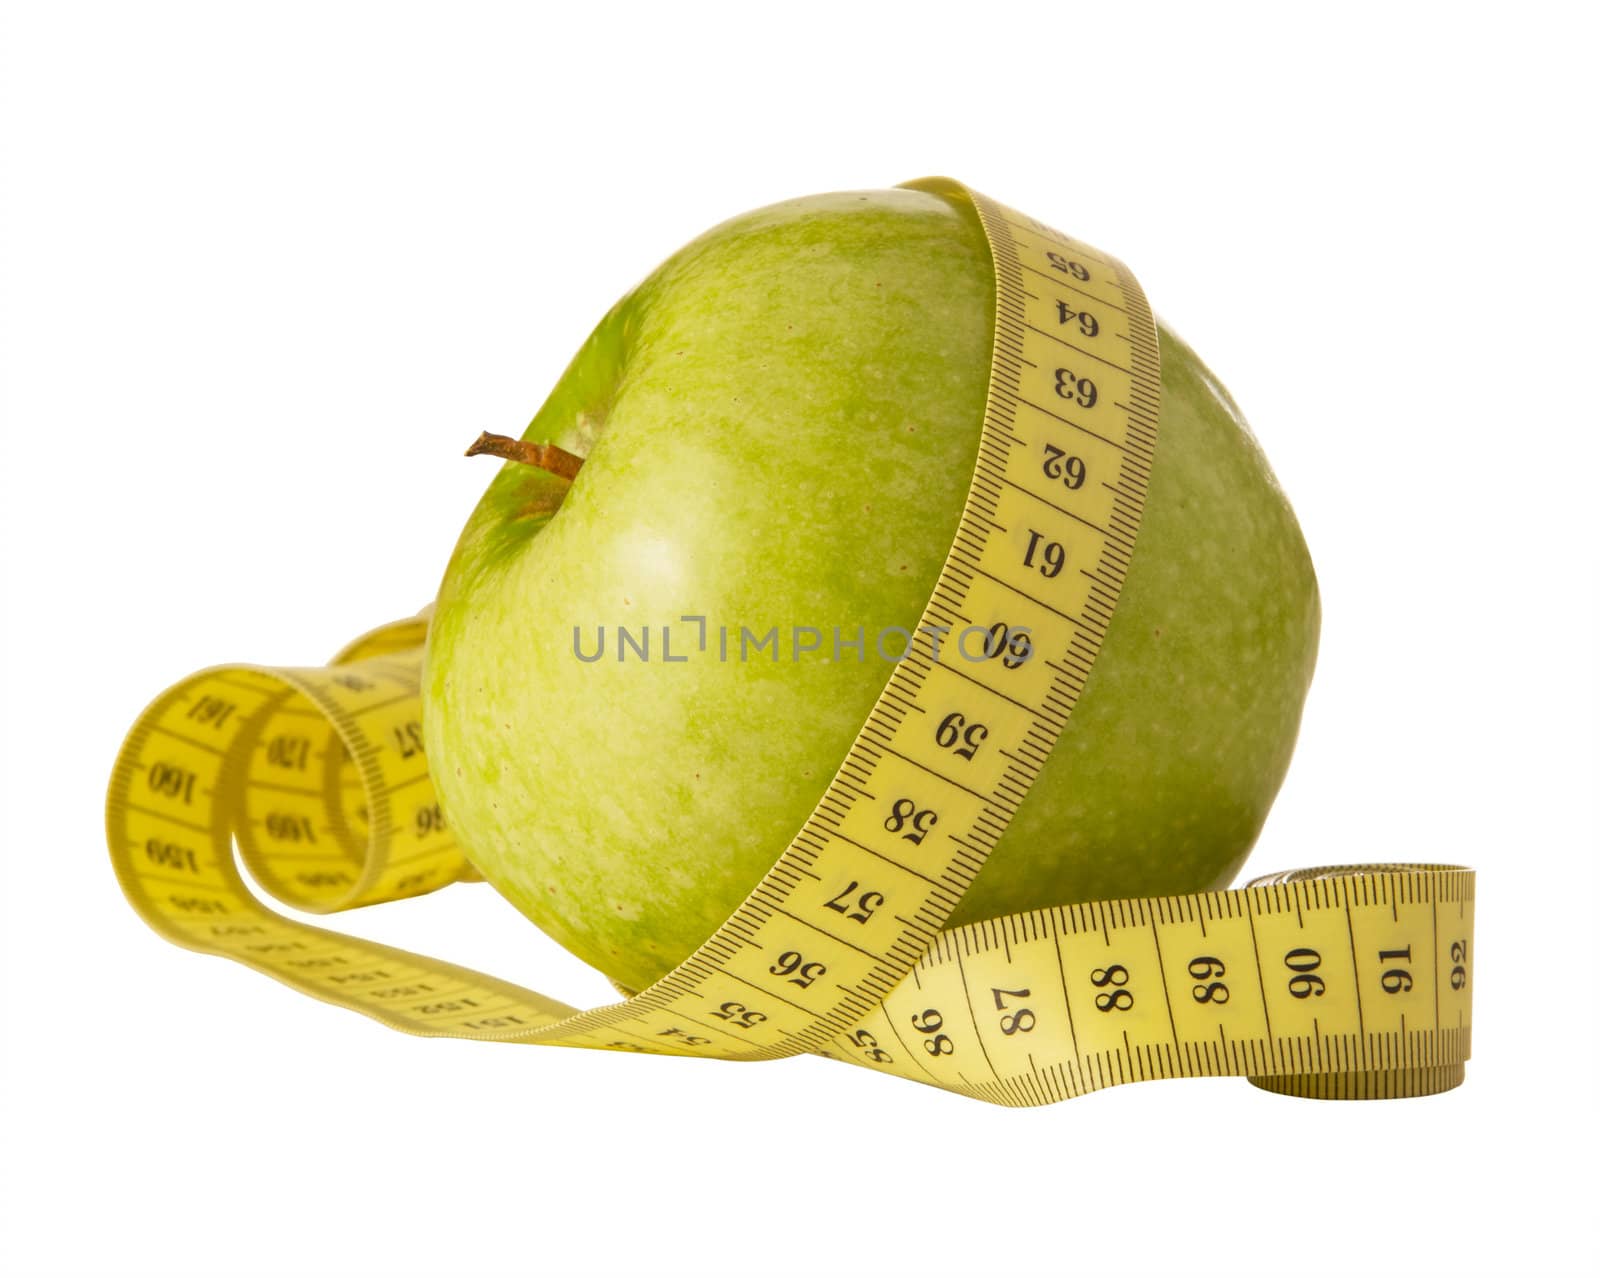 apple and measuring tape by Marina_Po